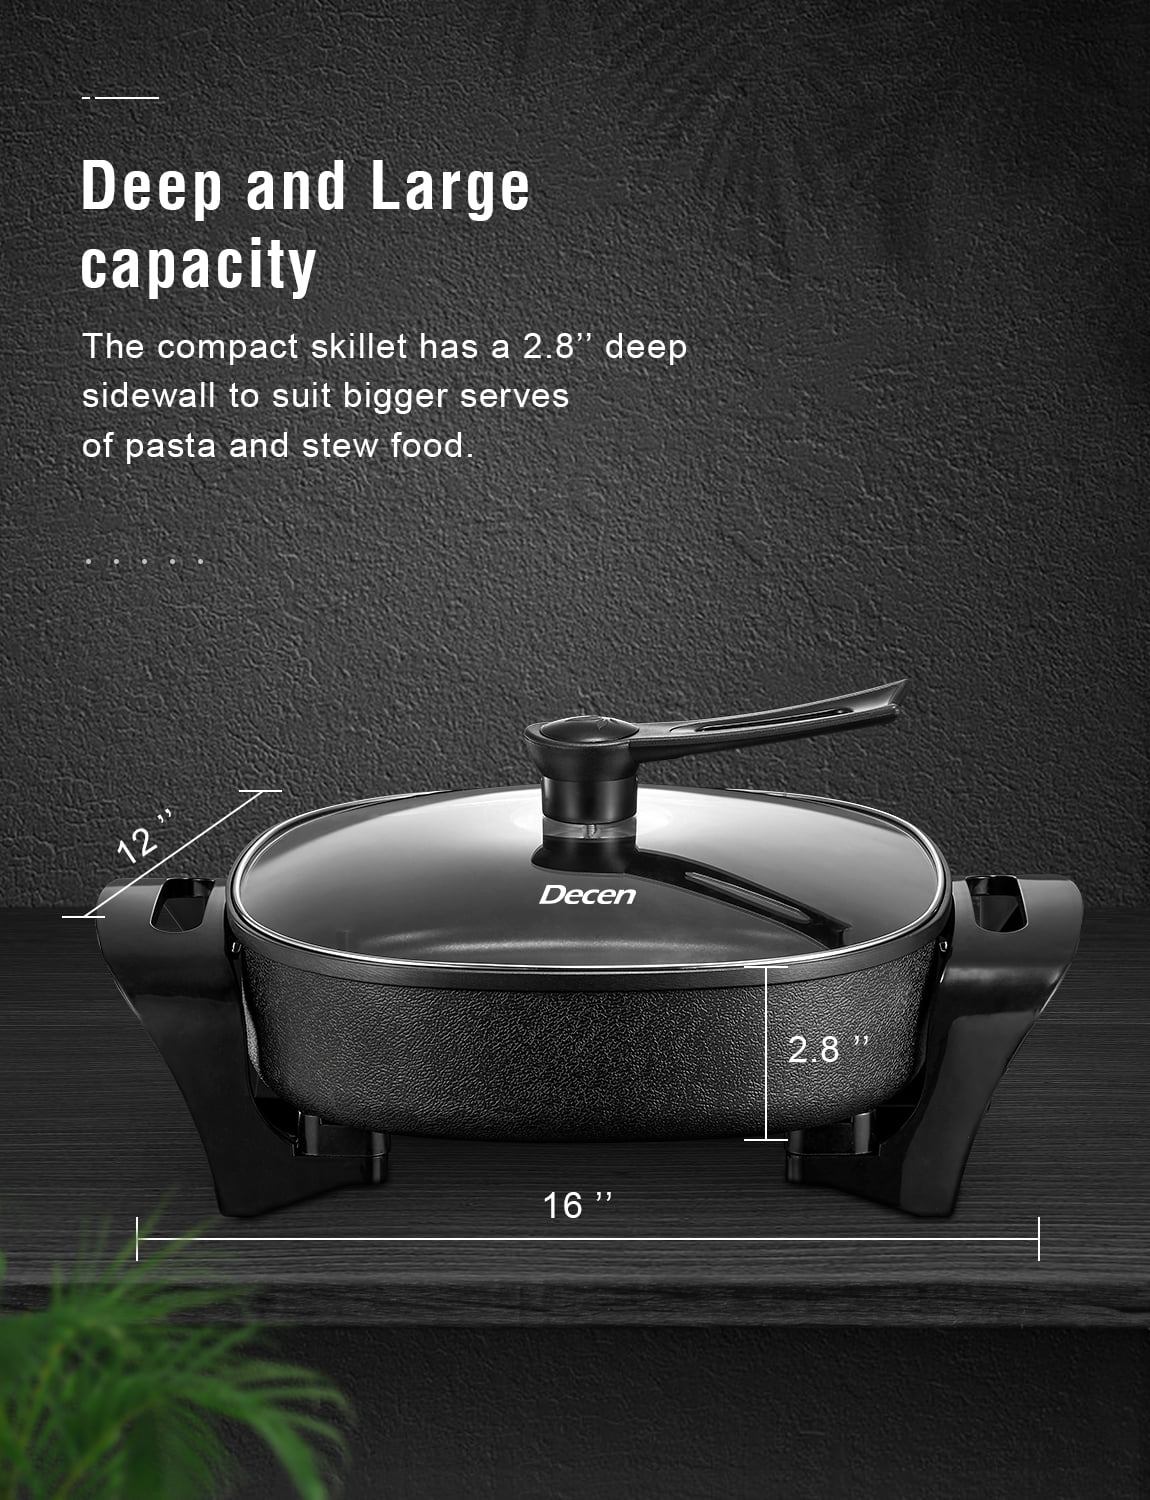 Upgrade Your Kitchen With This Premium Electric Skillet - Non Stick, Glass  Lid & 1360 Watts